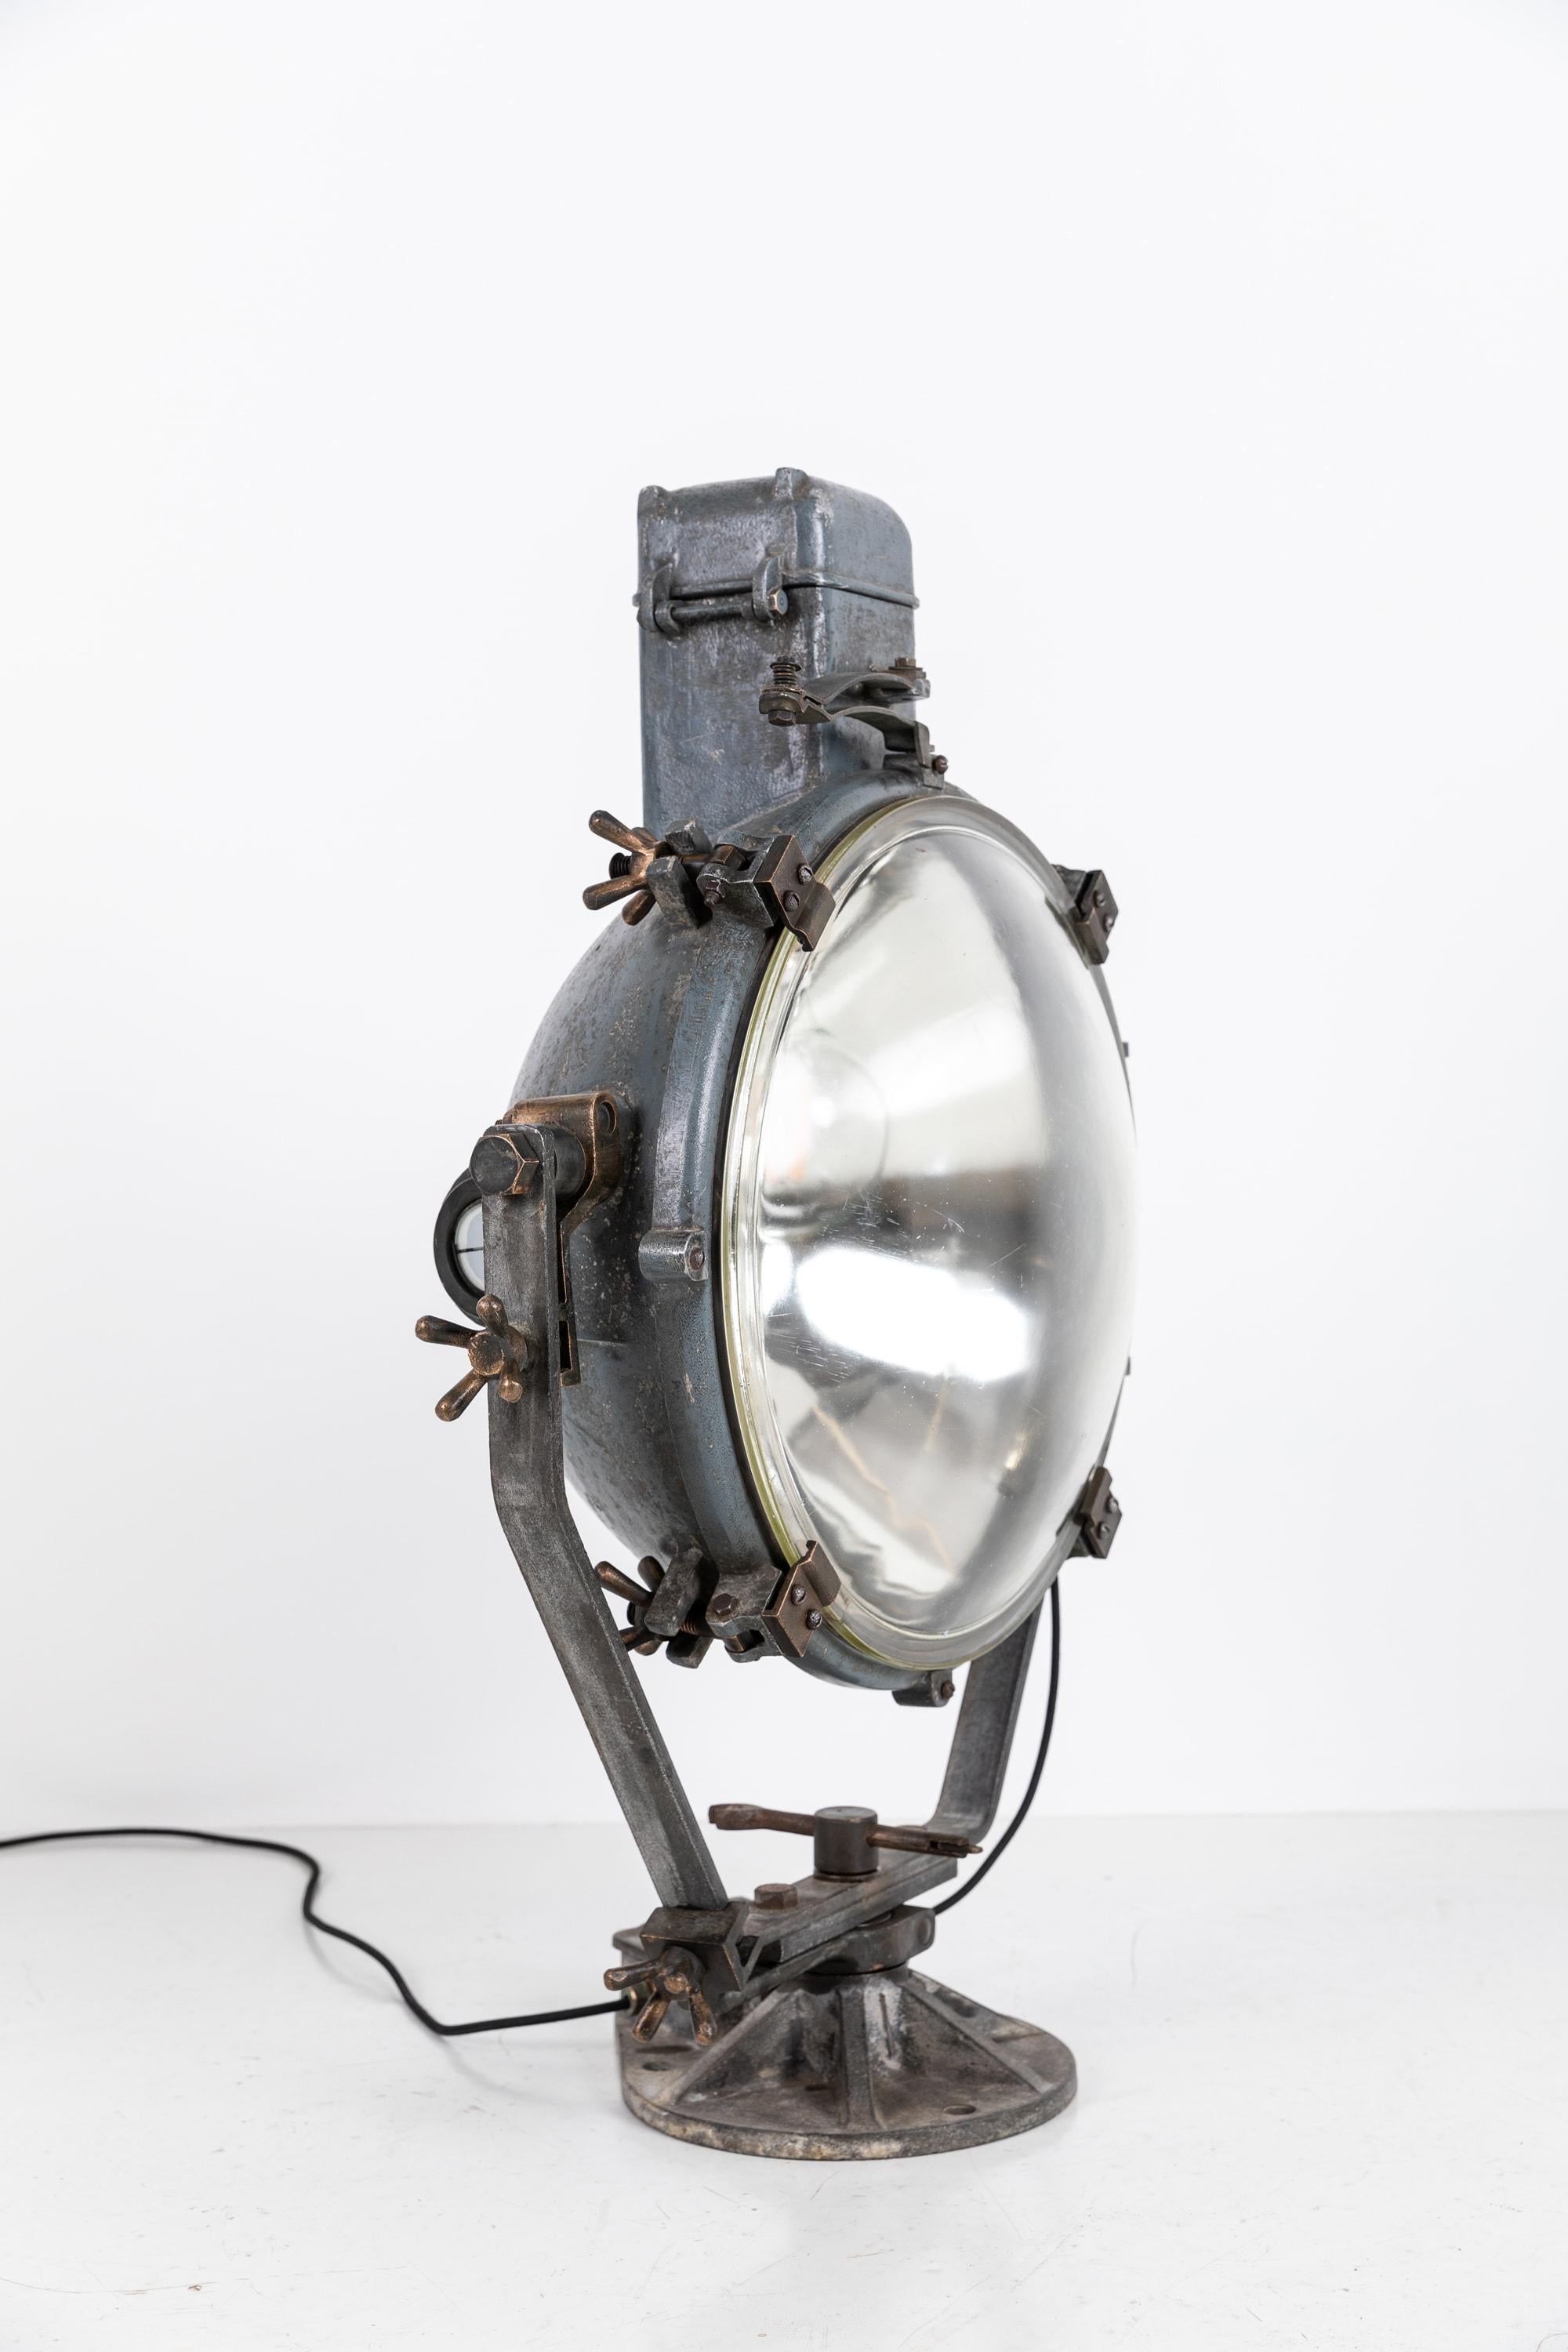 A quality and rare example of a large WWII era ships search light by 20th century electrical manufactures GEC- General Electric Company. c.1940

An incredible piece of engineering, comprising of heavy cast metal with detailed bronze hardware and